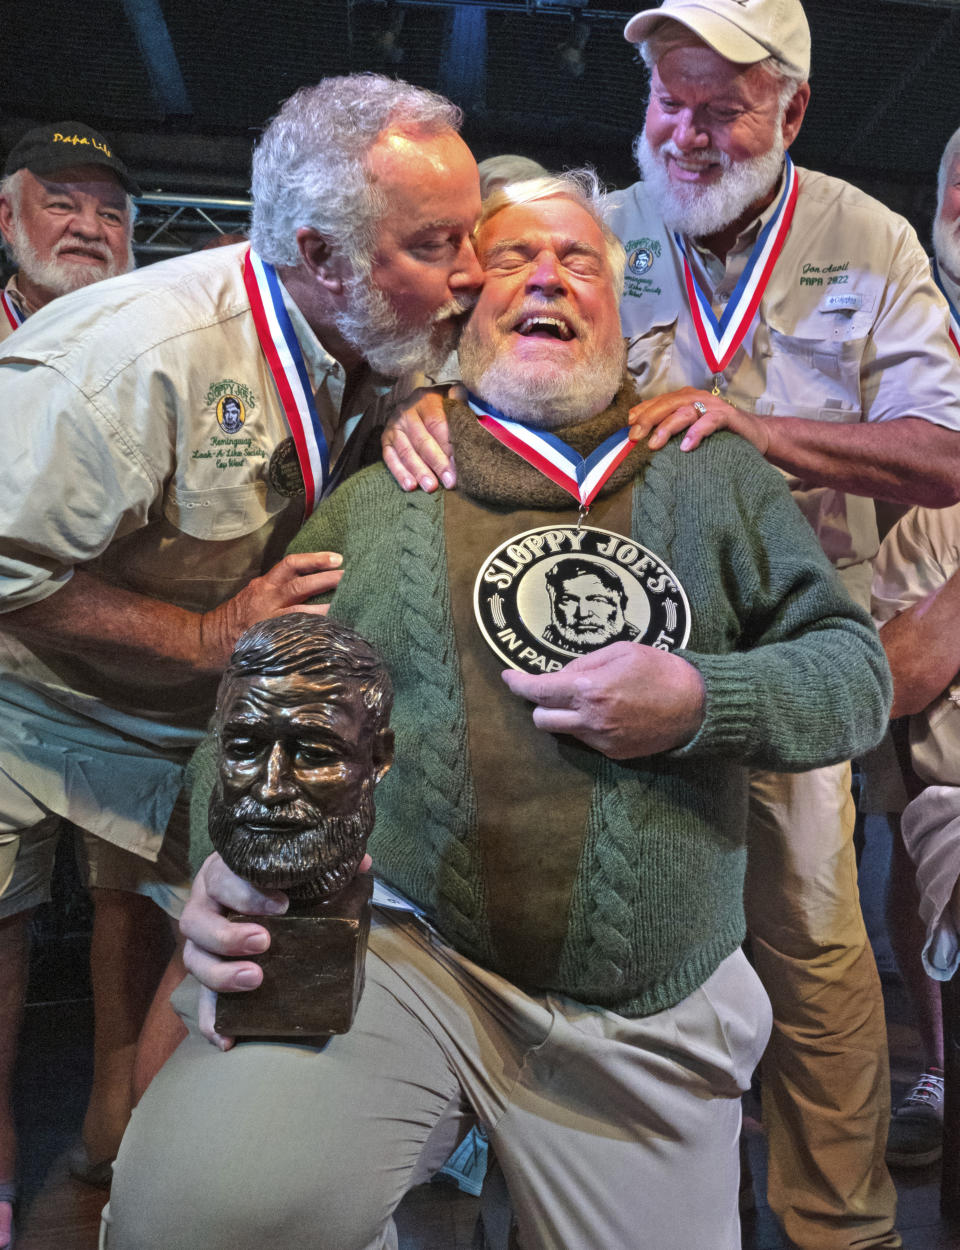 In this Saturday, July 22, 2023, photo provided by the Florida Keys News Bureau, Zach Taylor, left, and Jon Auvil, right, congratulate Gerrit Marshall, center, for winning the annual Hemingway Look-Alike Contest at Sloppy Joe's Bar in Key West, Fla. After 11 years of competing Marshall, a Madison, Wisc., resident, finally achieved success on his 68th birthday. The competition was a highlight of the annual Hemingway Days festival that ends Sunday, July 23. Ernest Hemingway lived in Key West throughout most of the 1930s. Taylor won in 2021, while Auvil was the 2022 winner. (Andy Newman/Florida Keys News Bureau via AP)